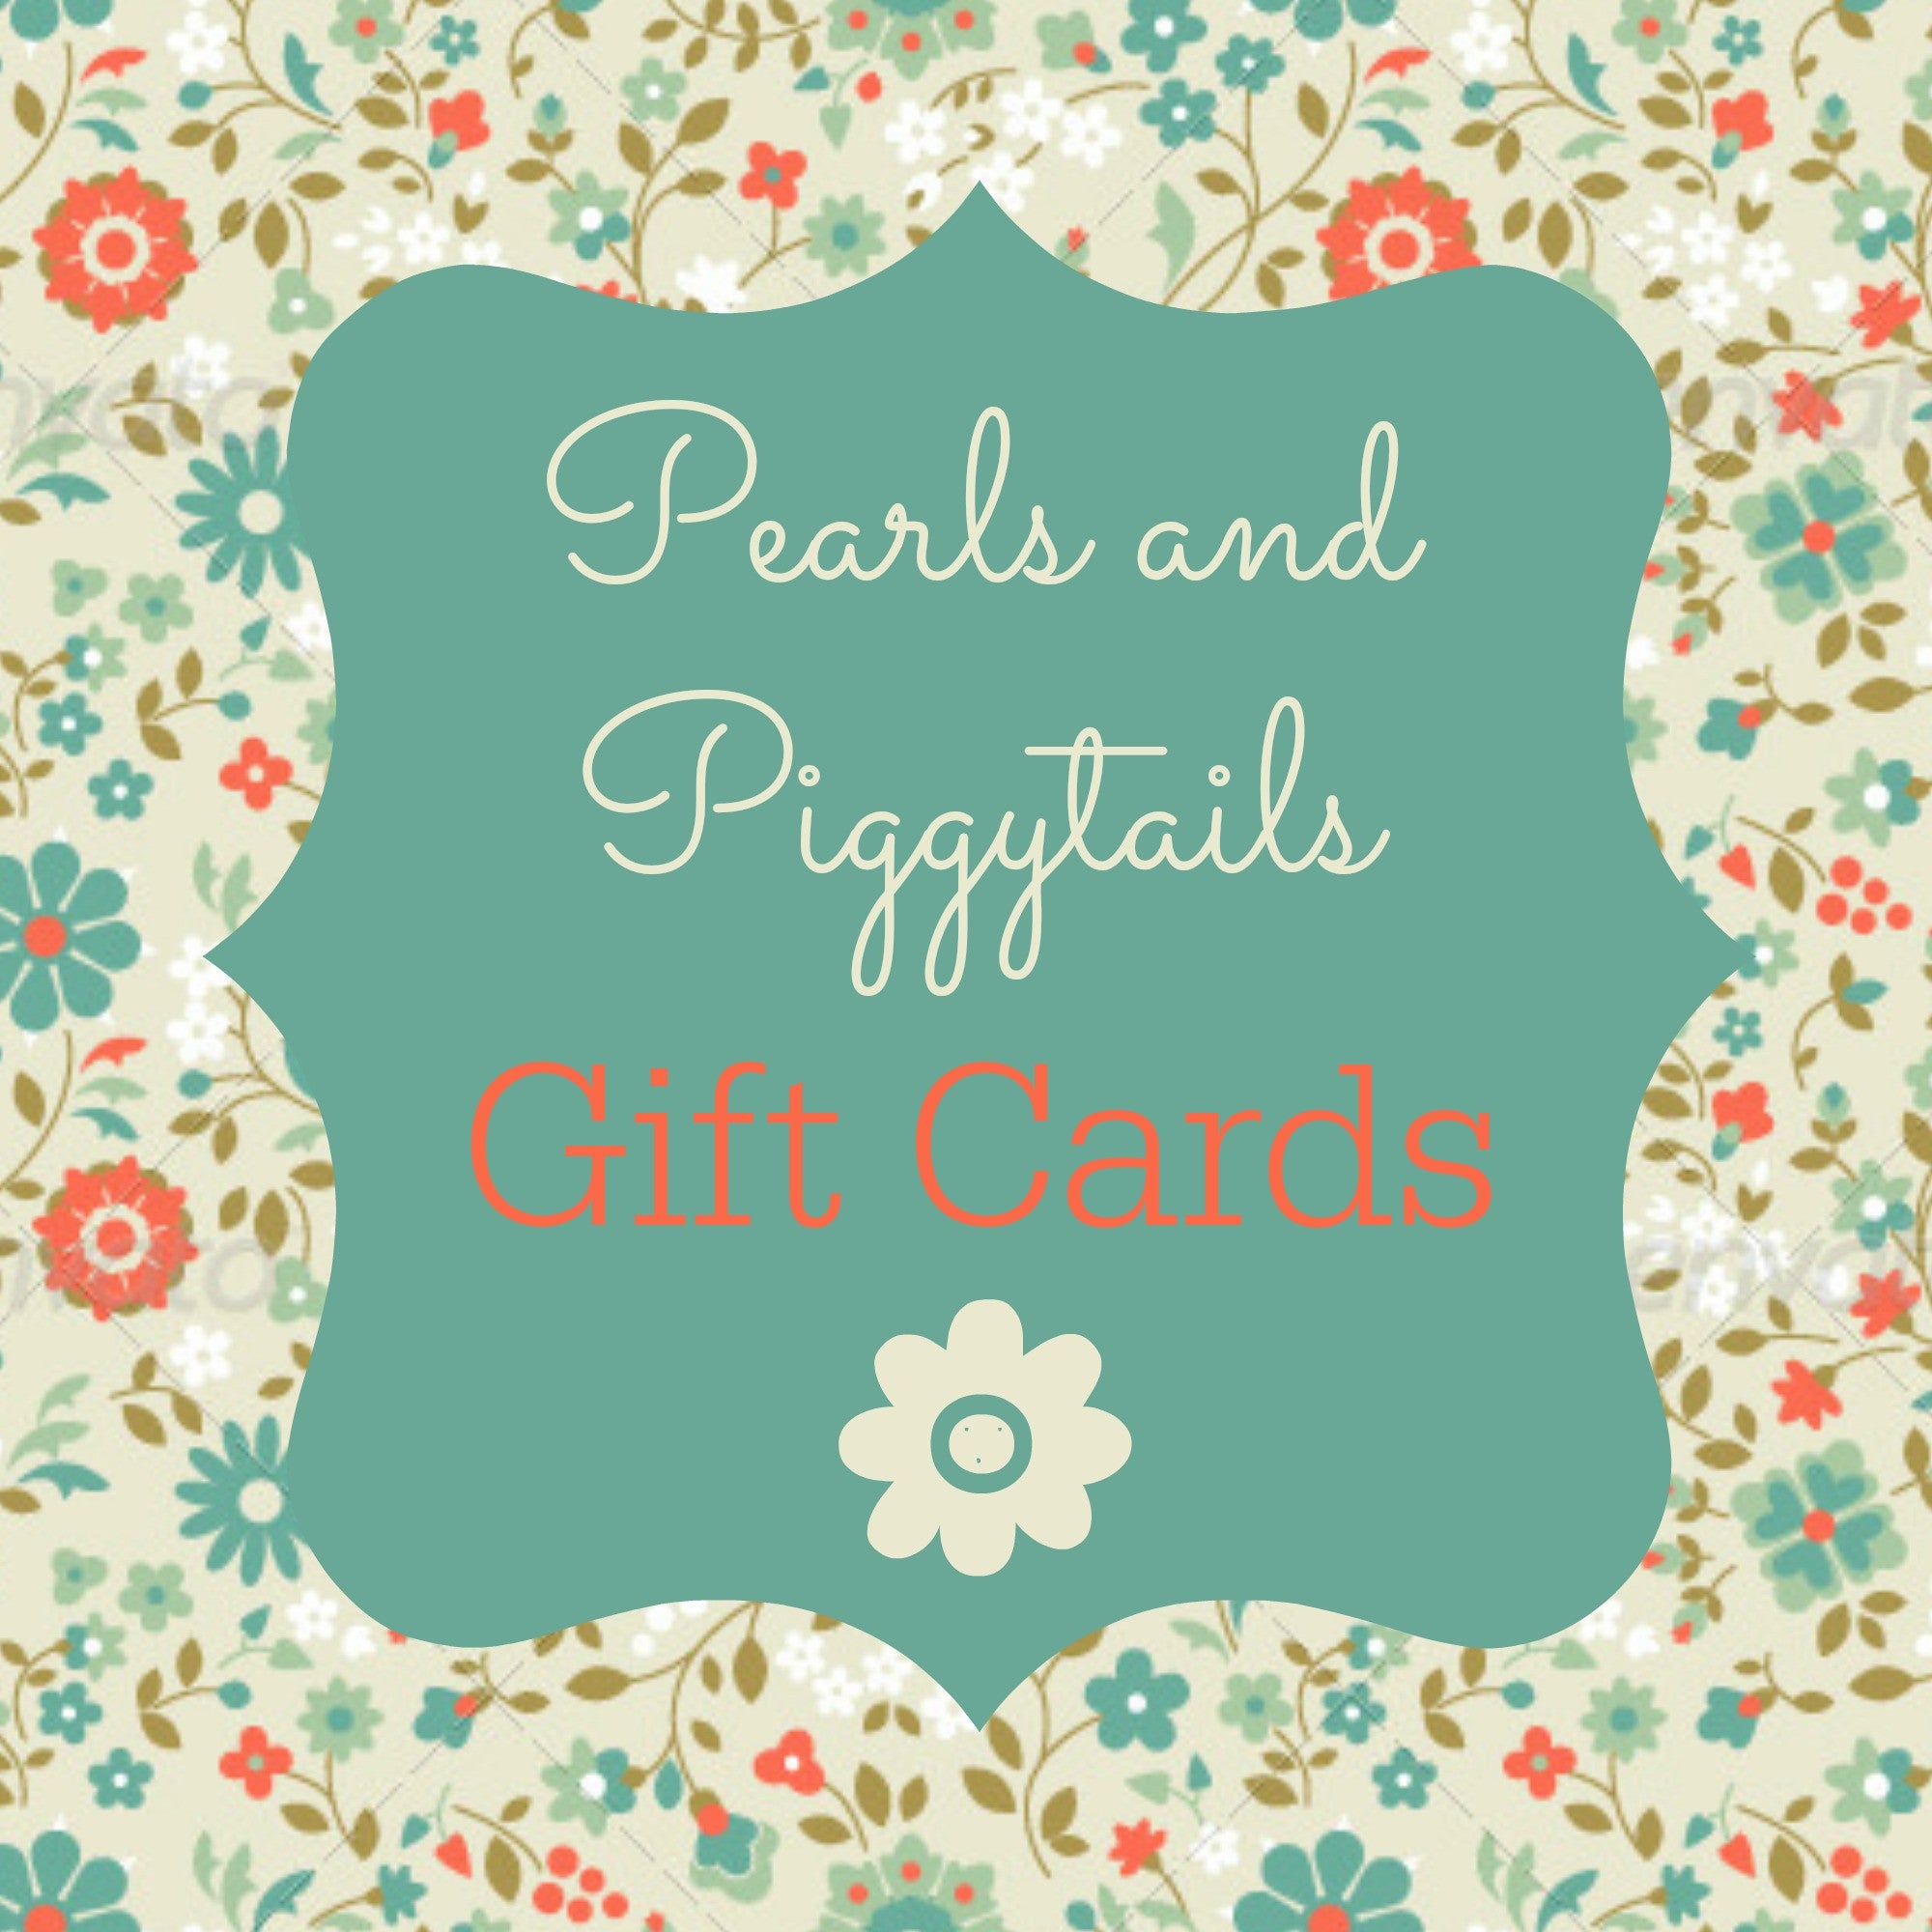 Gift Card - Pearls and Piggytails